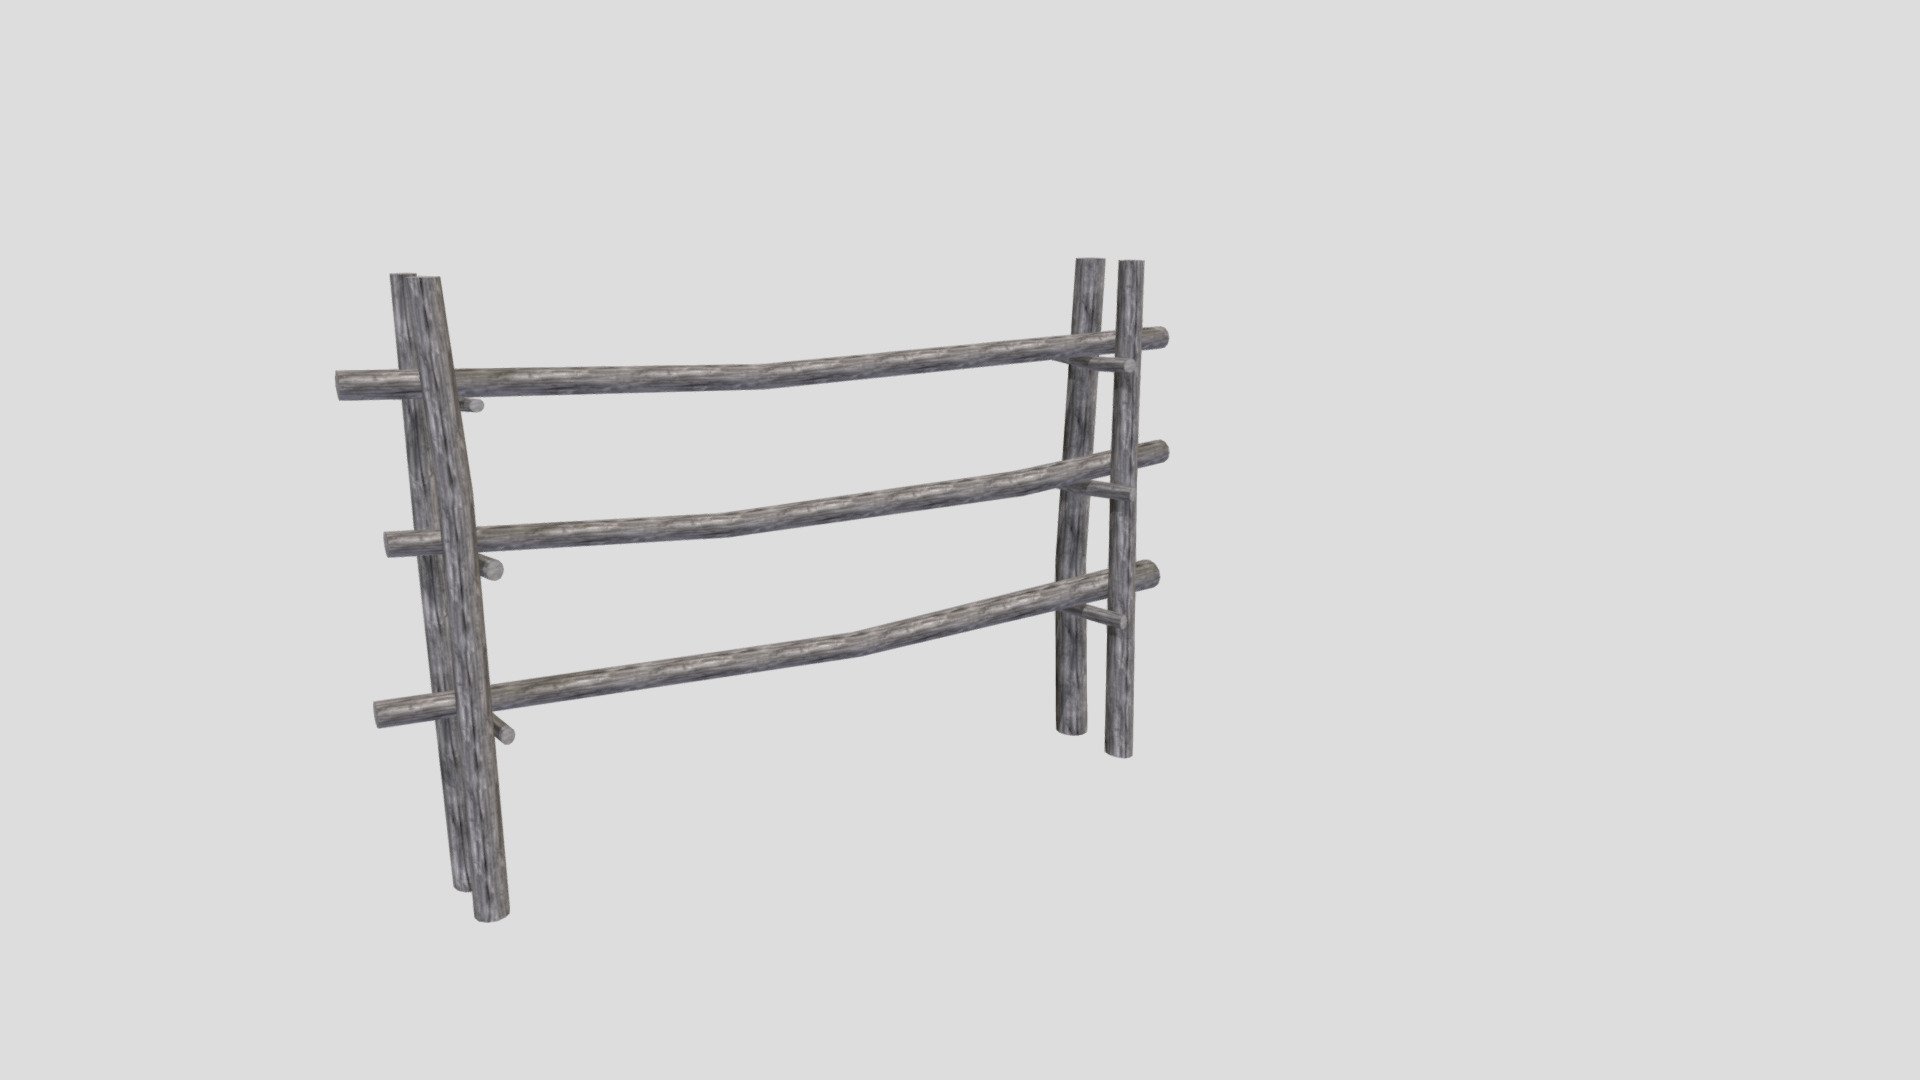 A rustic field gate made from weathered old wooden poles. Real life size and should be game ready with only 820 tris.

The model will be available for sale with LOD and physics models and alternative textures as soon as I get a seller account here. In the meantime the main model is available for free. Enjoy! ^_^

Plese do not upload this model to Second Life or Opensim. Those environments require some special adaptations, especially when it comes to LOD and physics, so it's better if you ask me for a version optimized for them instead 3d model